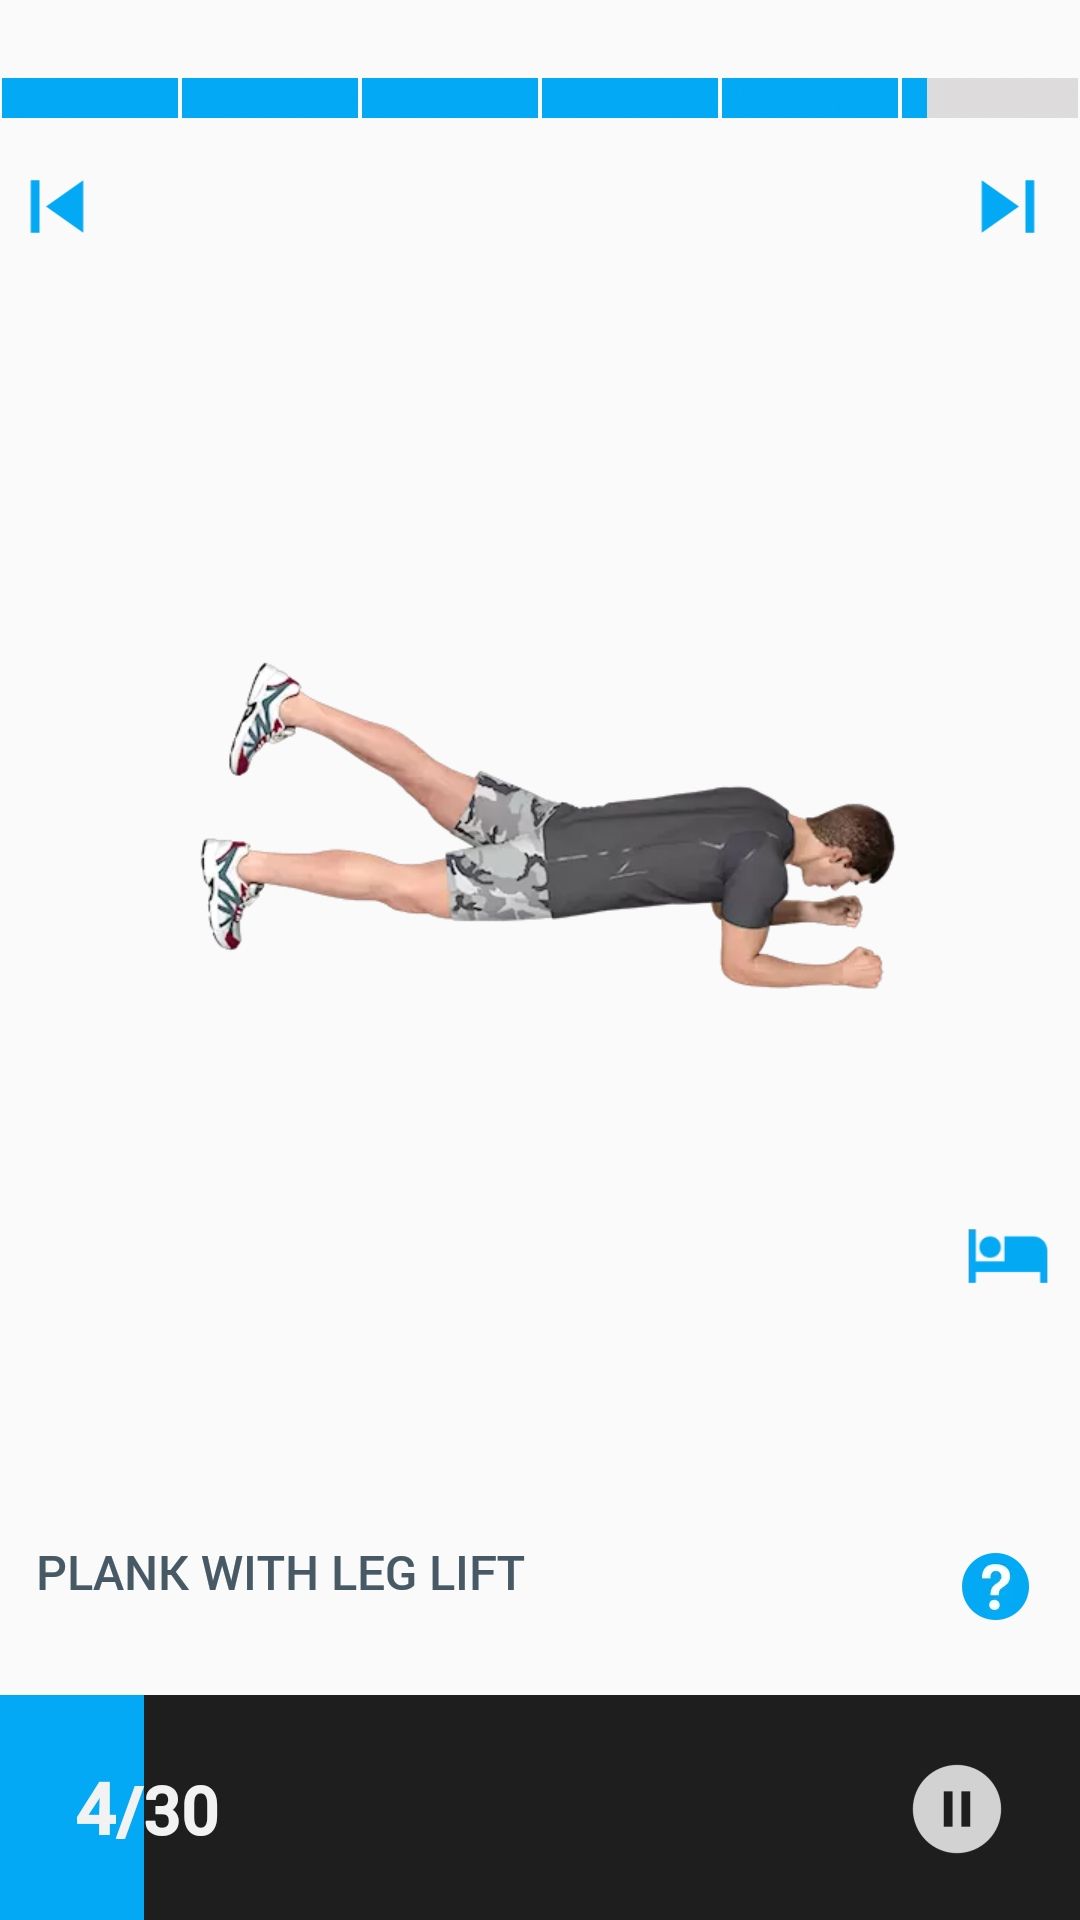 Weight loss workout for men mobile app plank exercise